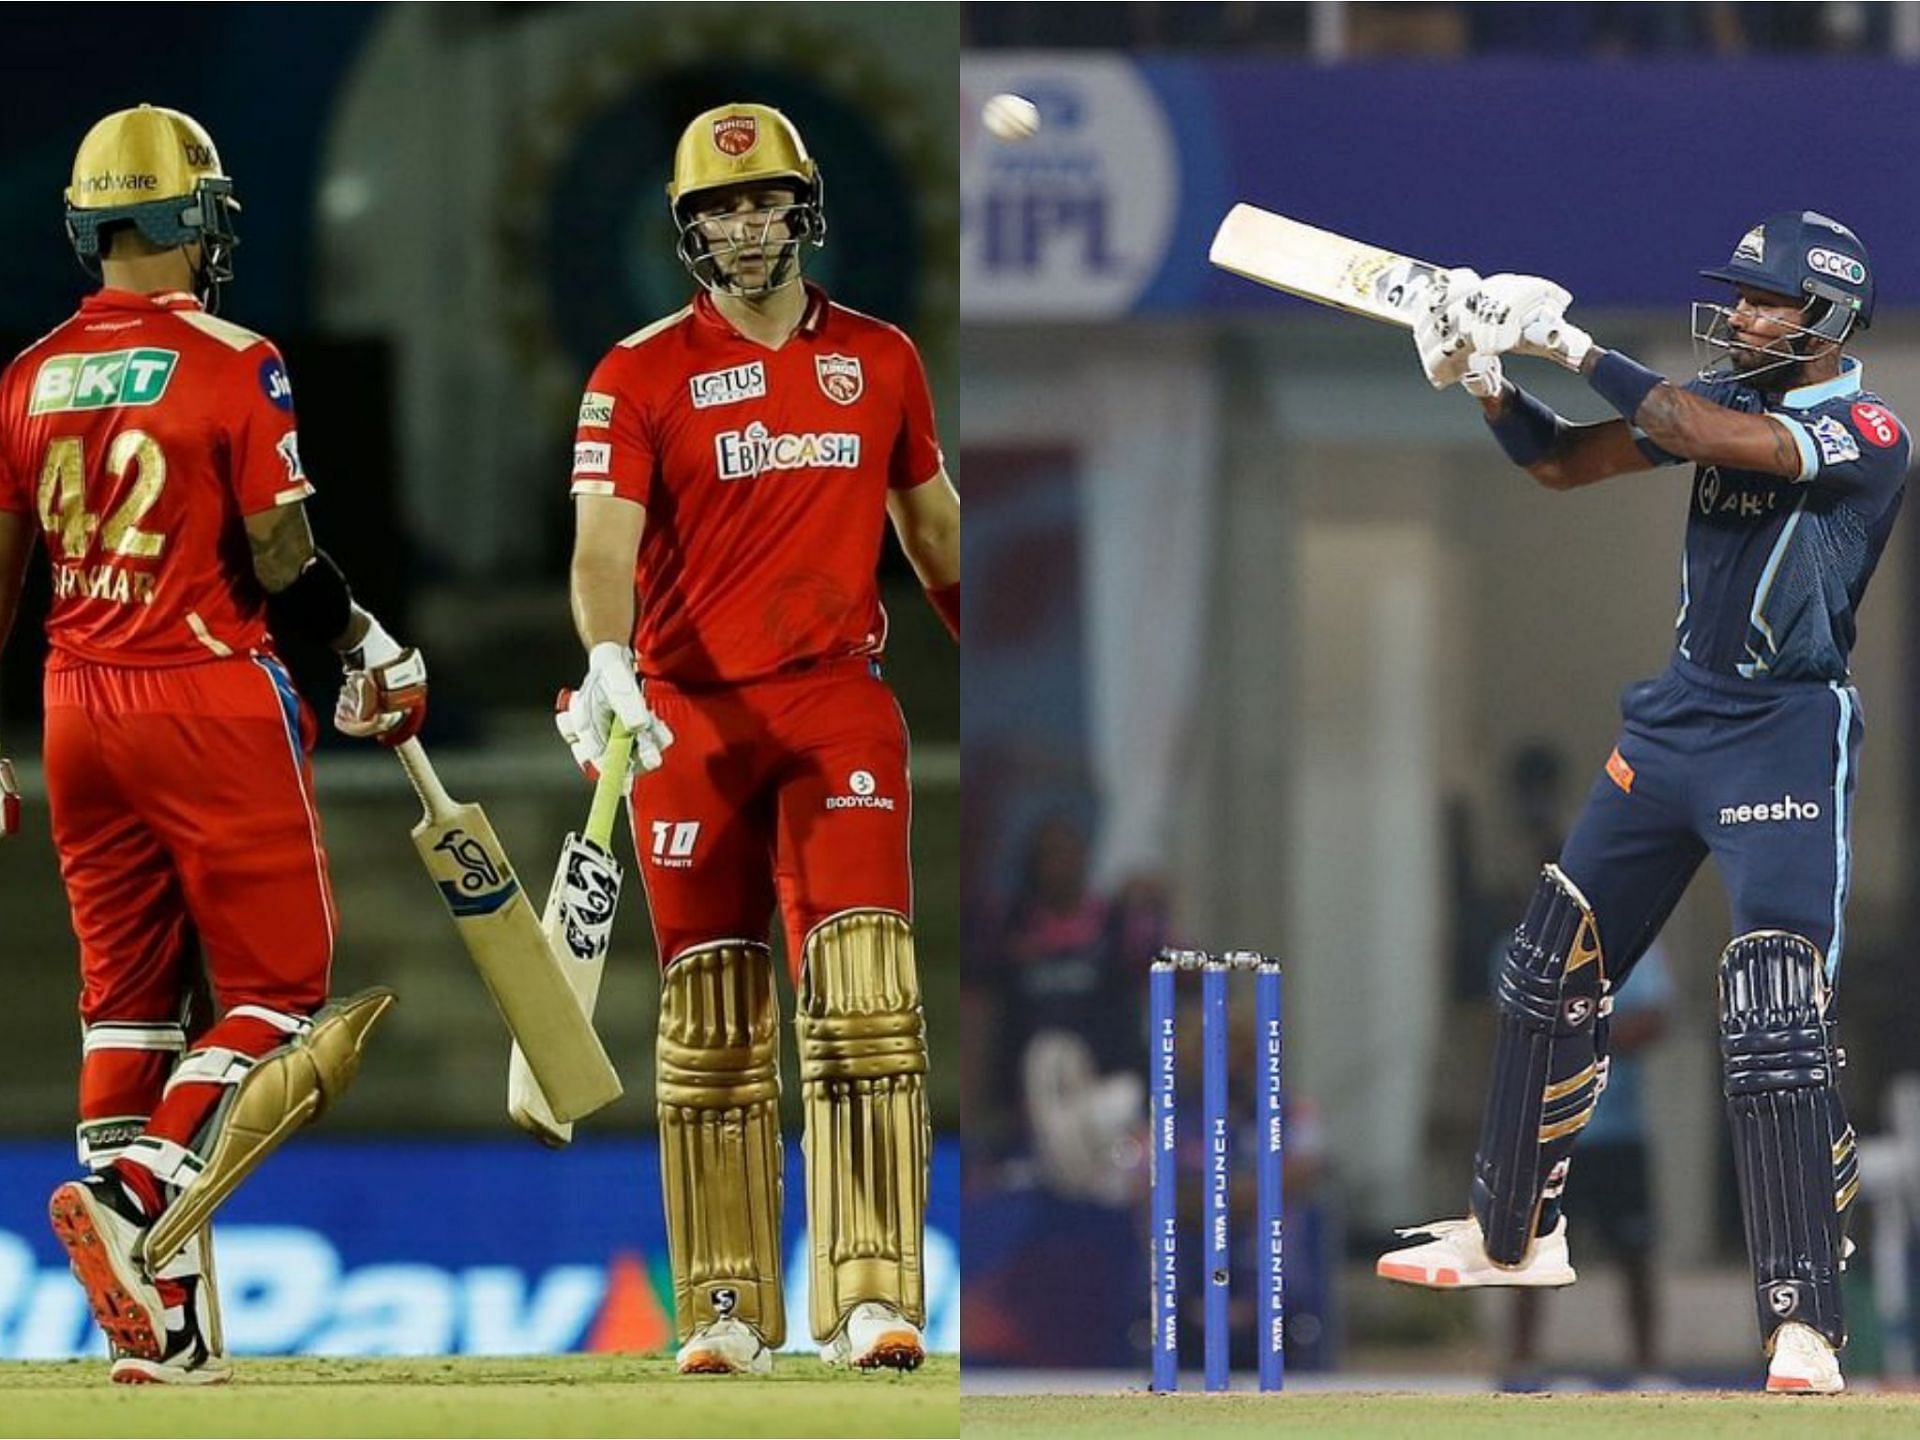 Match 48 of the IPL 2022 will be played between Gujarat Titans and Punjab Kings